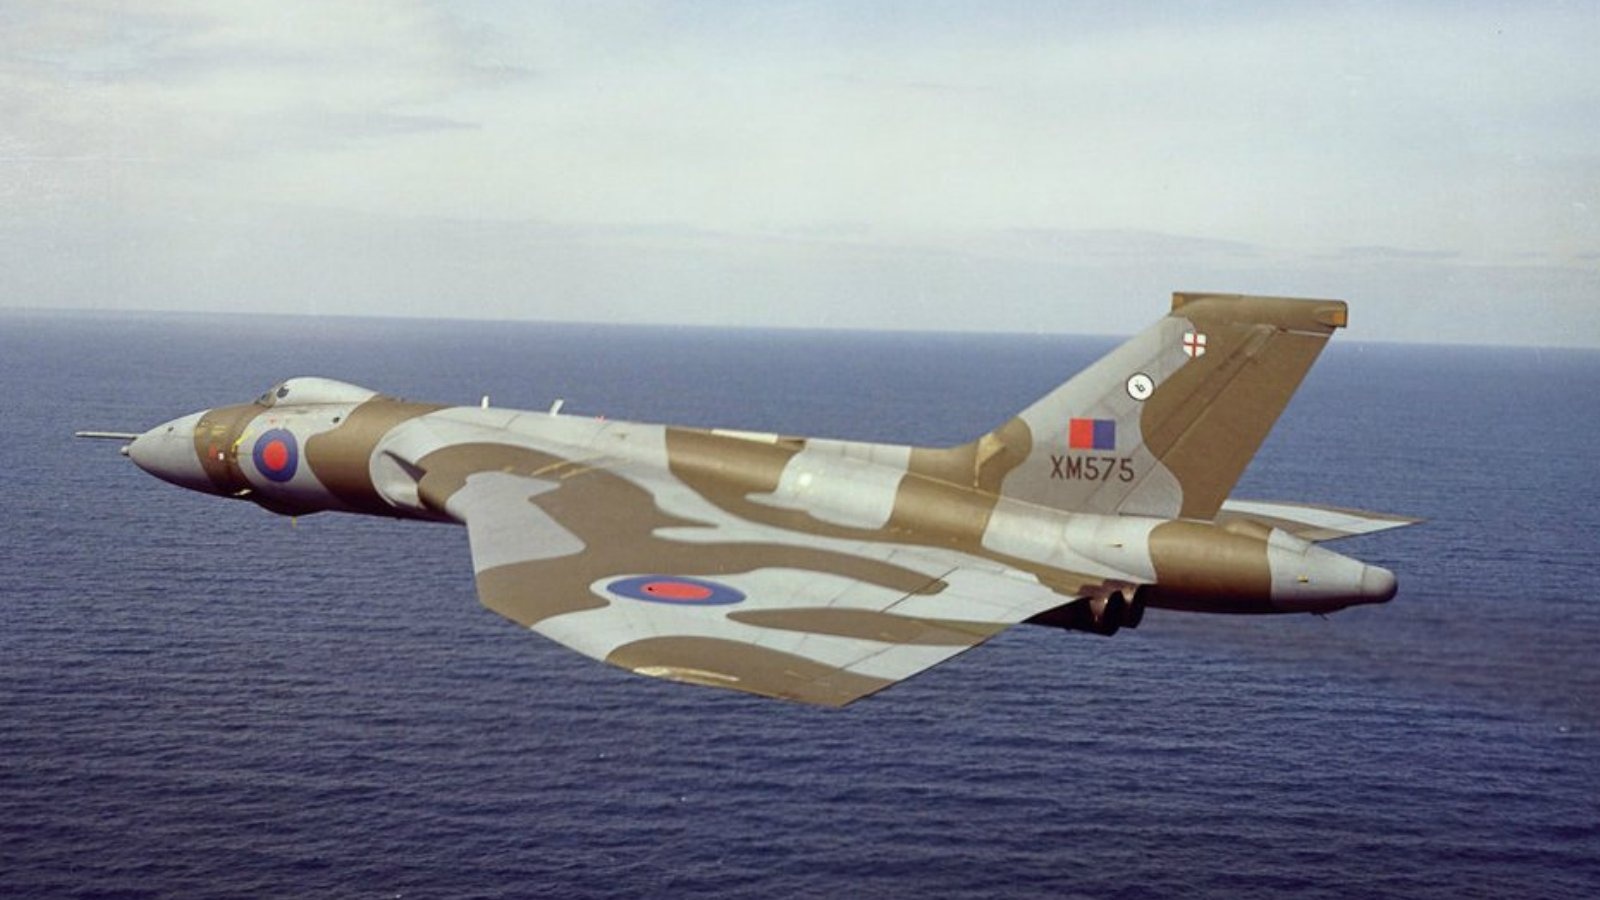 v1-Avro-698-Vulcan-B.2.a-XM575-was-delivered-to-No.-617-Squadron-Dambusters-at-Scampton-in-May-1953.jpg